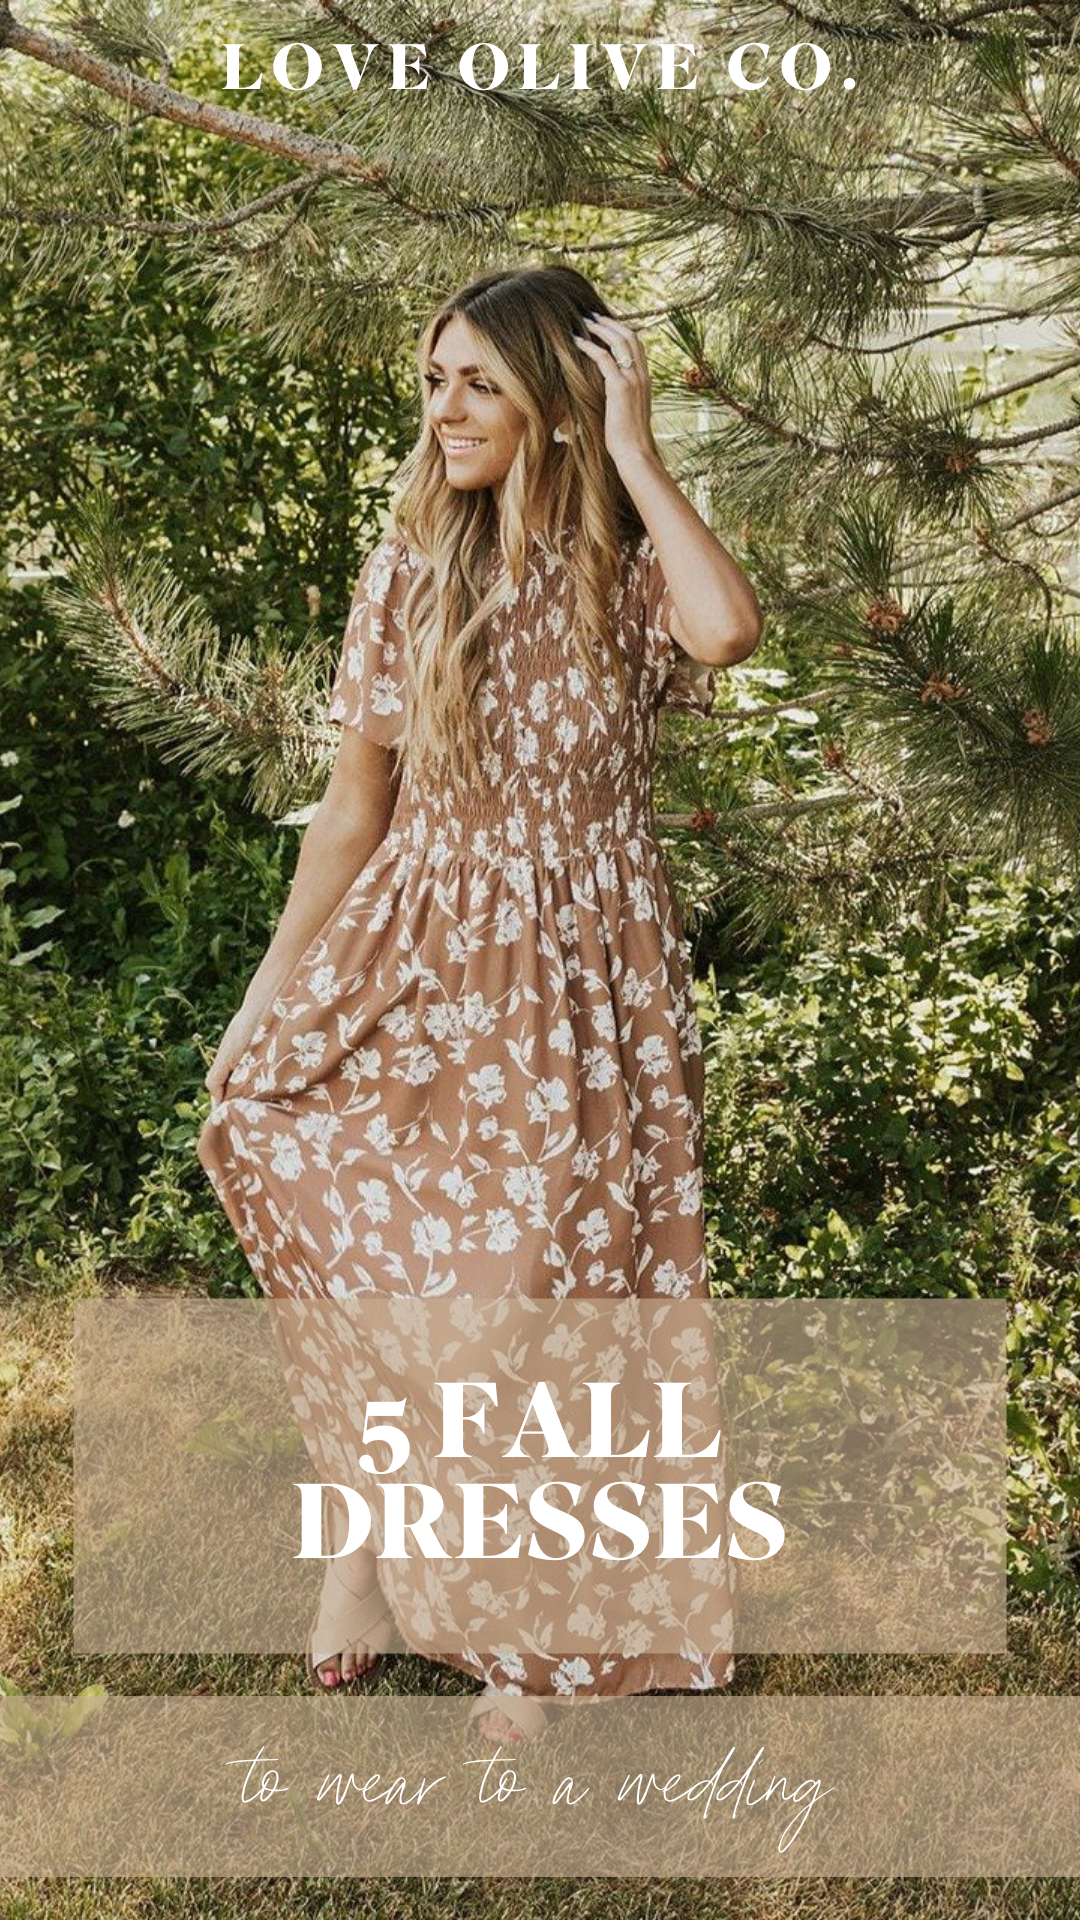 5 fall dresses to wear to a special event. www.loveoliveco.com